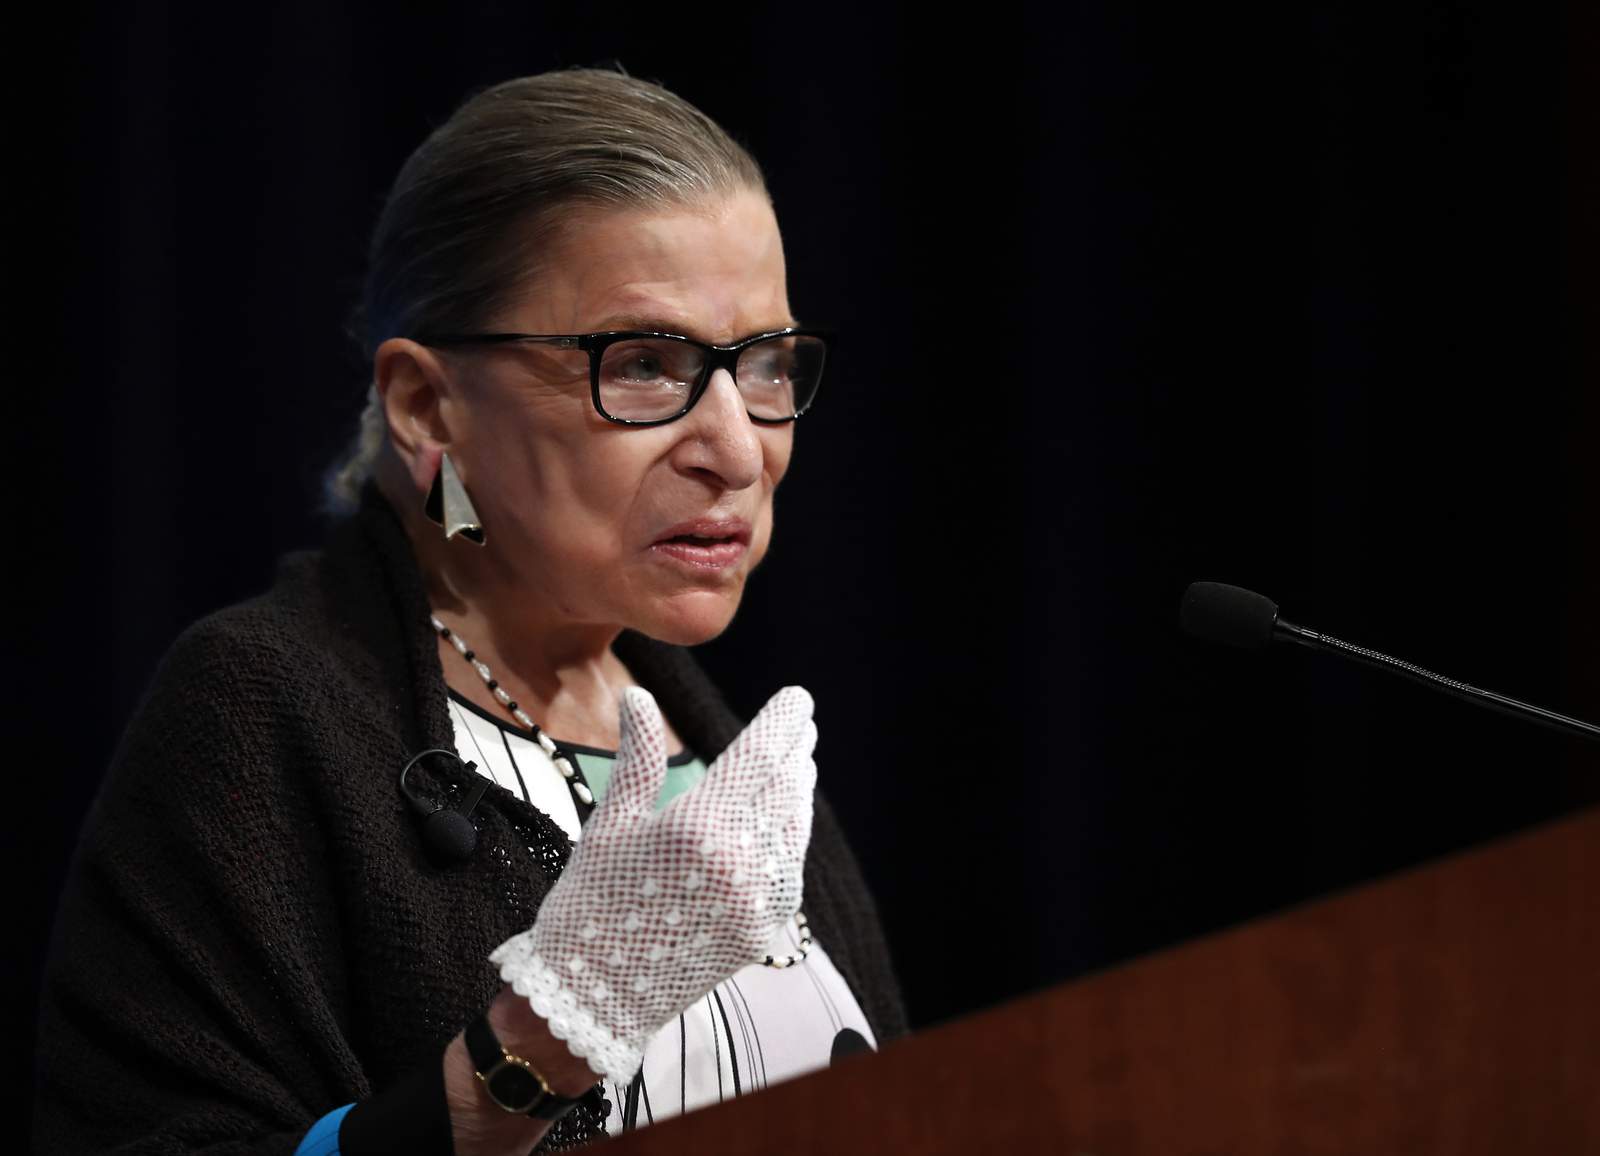 Ginsburg's style was more than a subtle courtroom statement